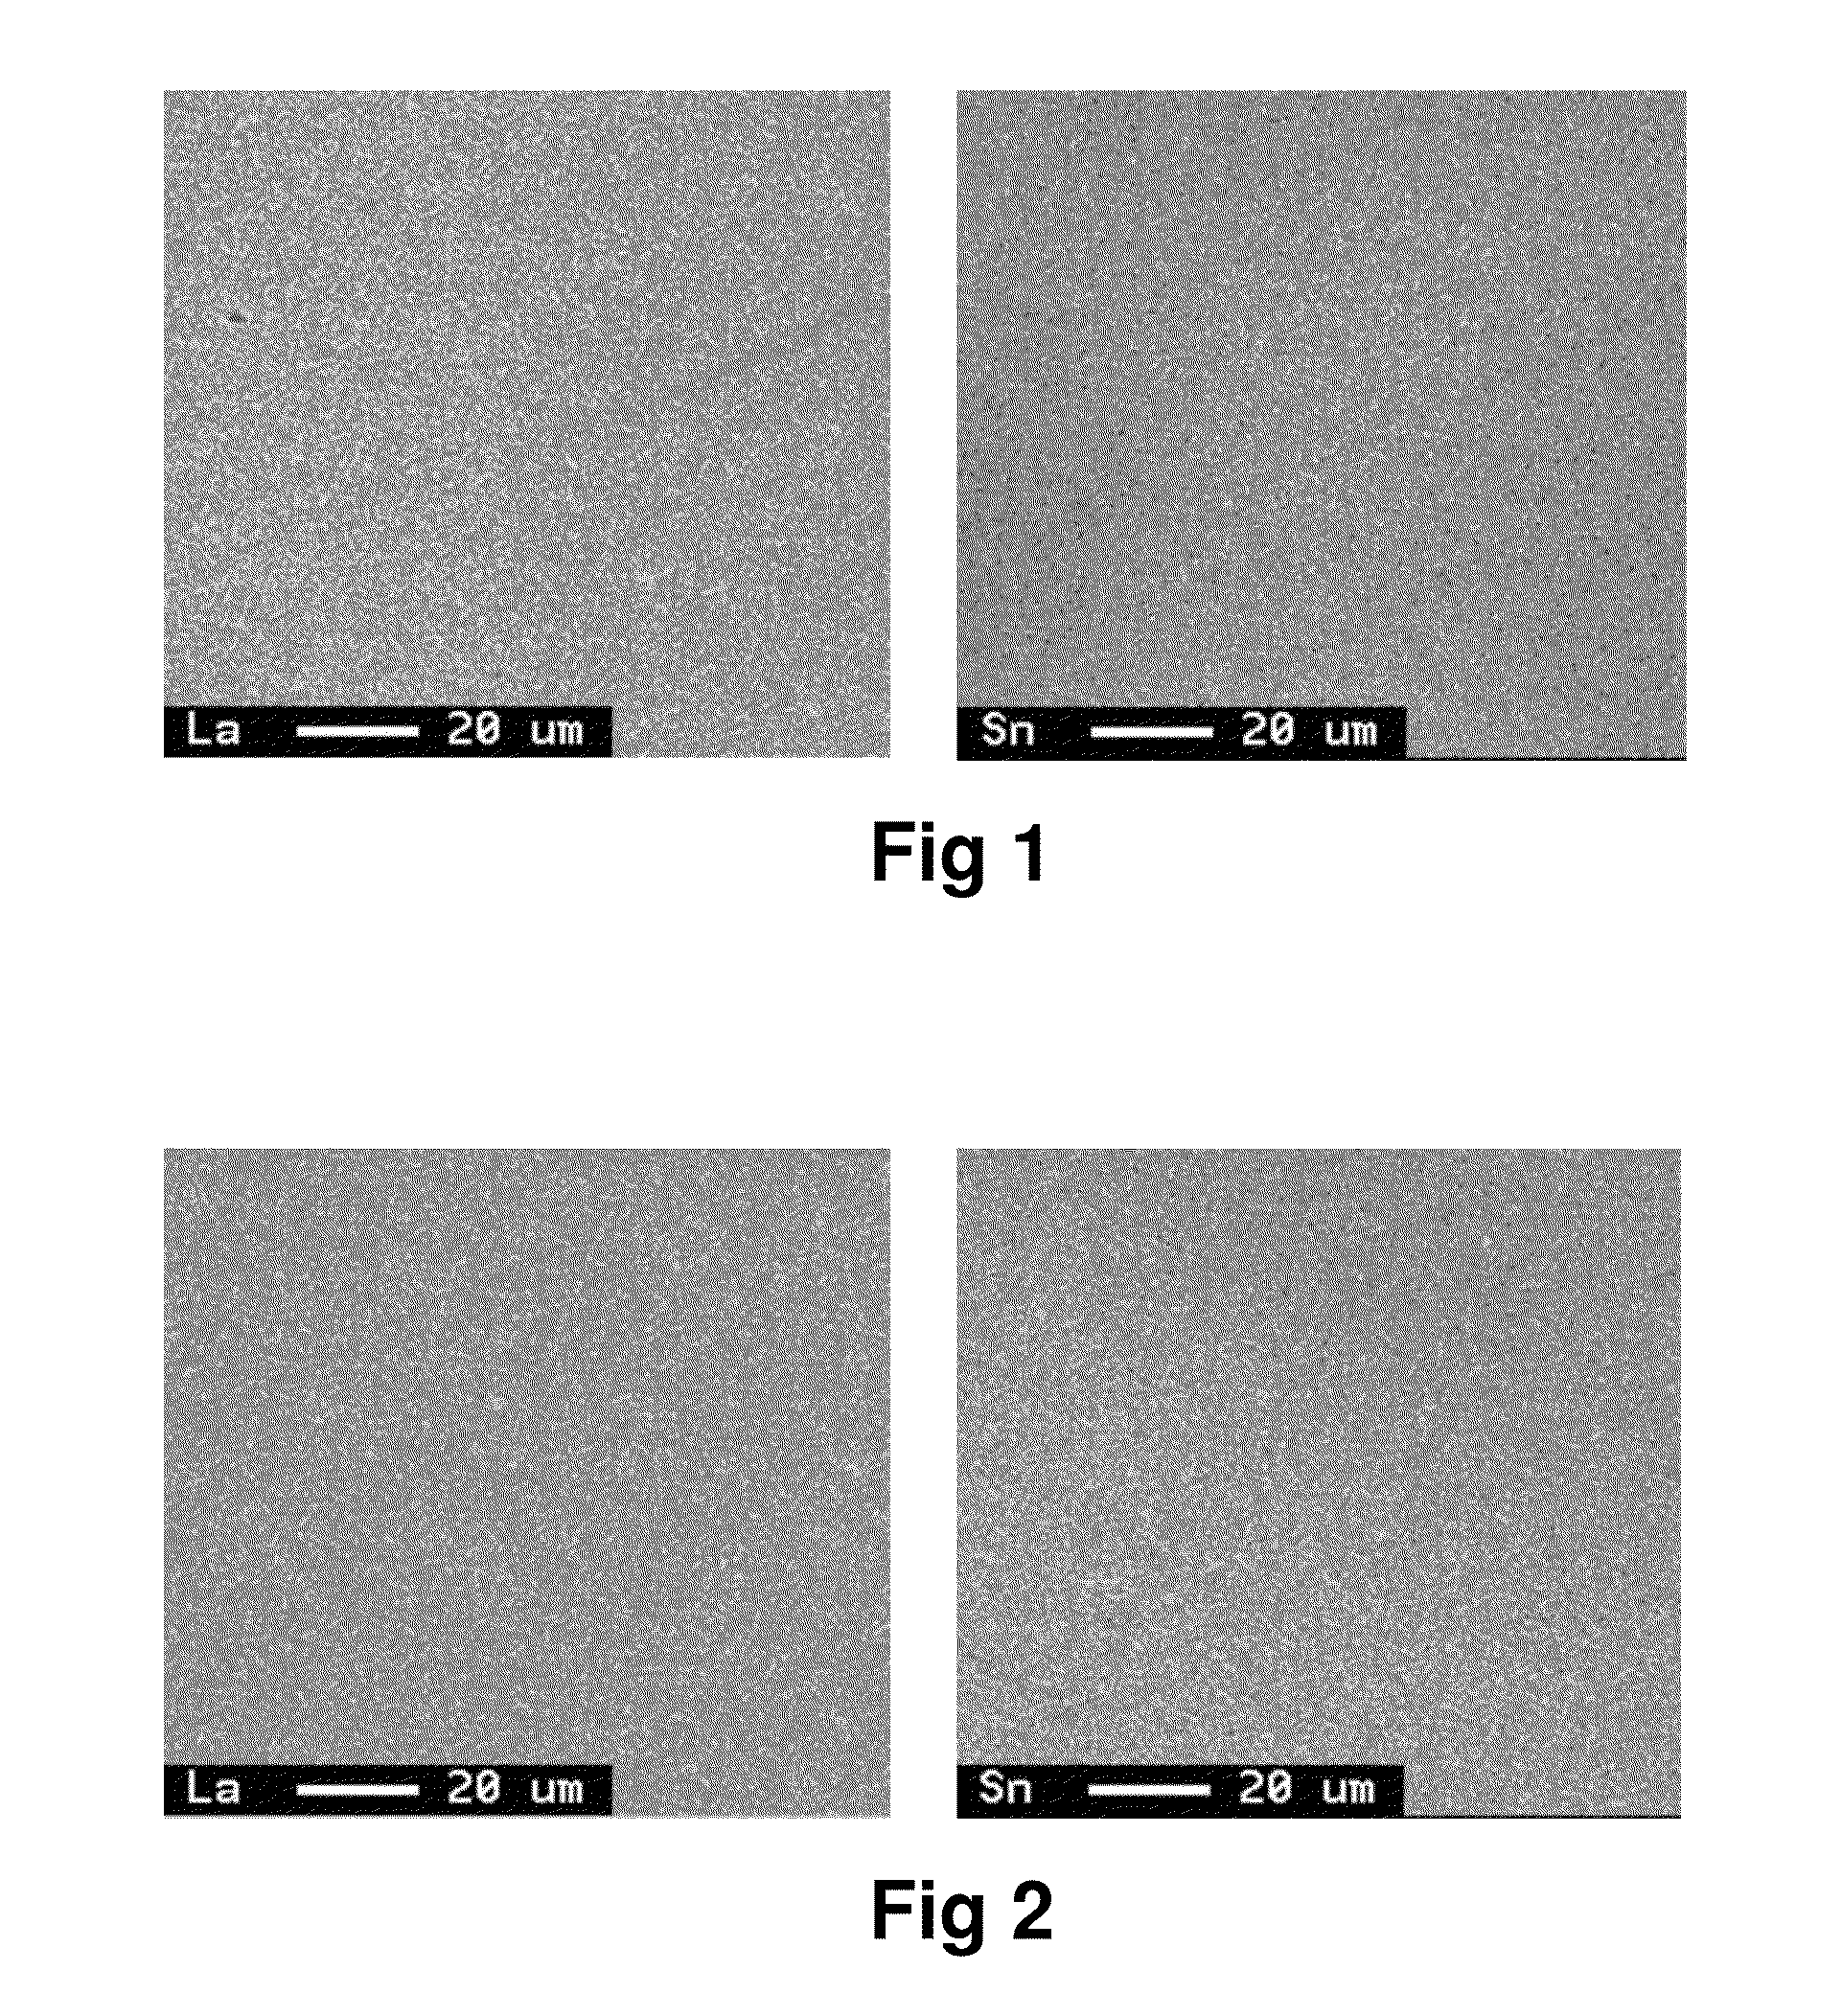 Hydrogen absorbing alloy, negative pole, and nickel-hydrogen secondary battery